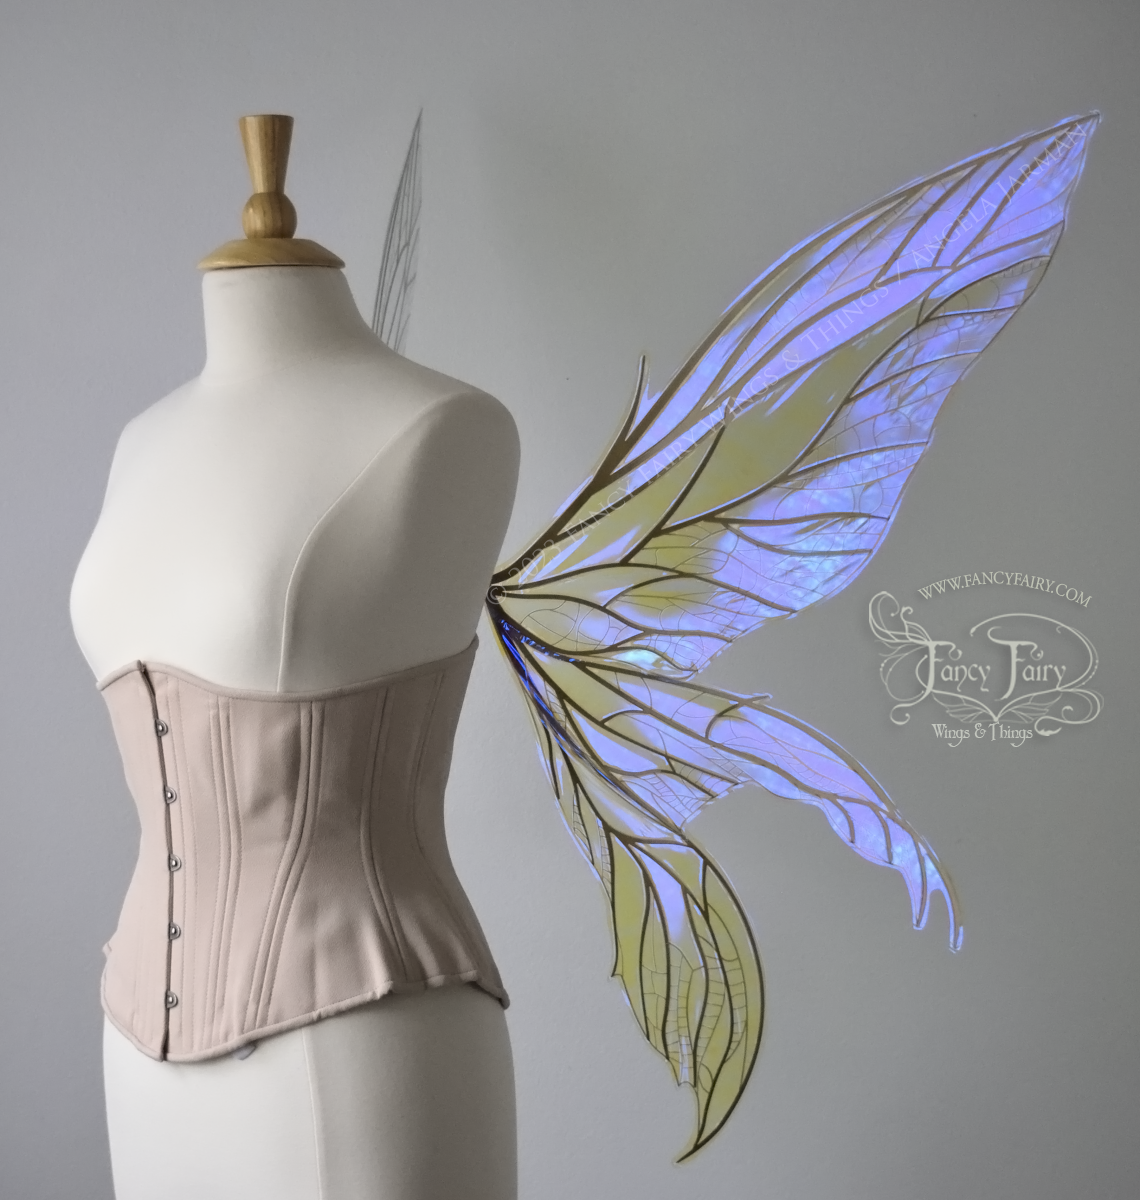 Right side view of an ivory dress form wearing an alabaster underbust corset & large violet iridescent fairy wings. Upper panels are elongated with pointed tips, 2 lower panels curve downward, lots of thin vein detail in gold